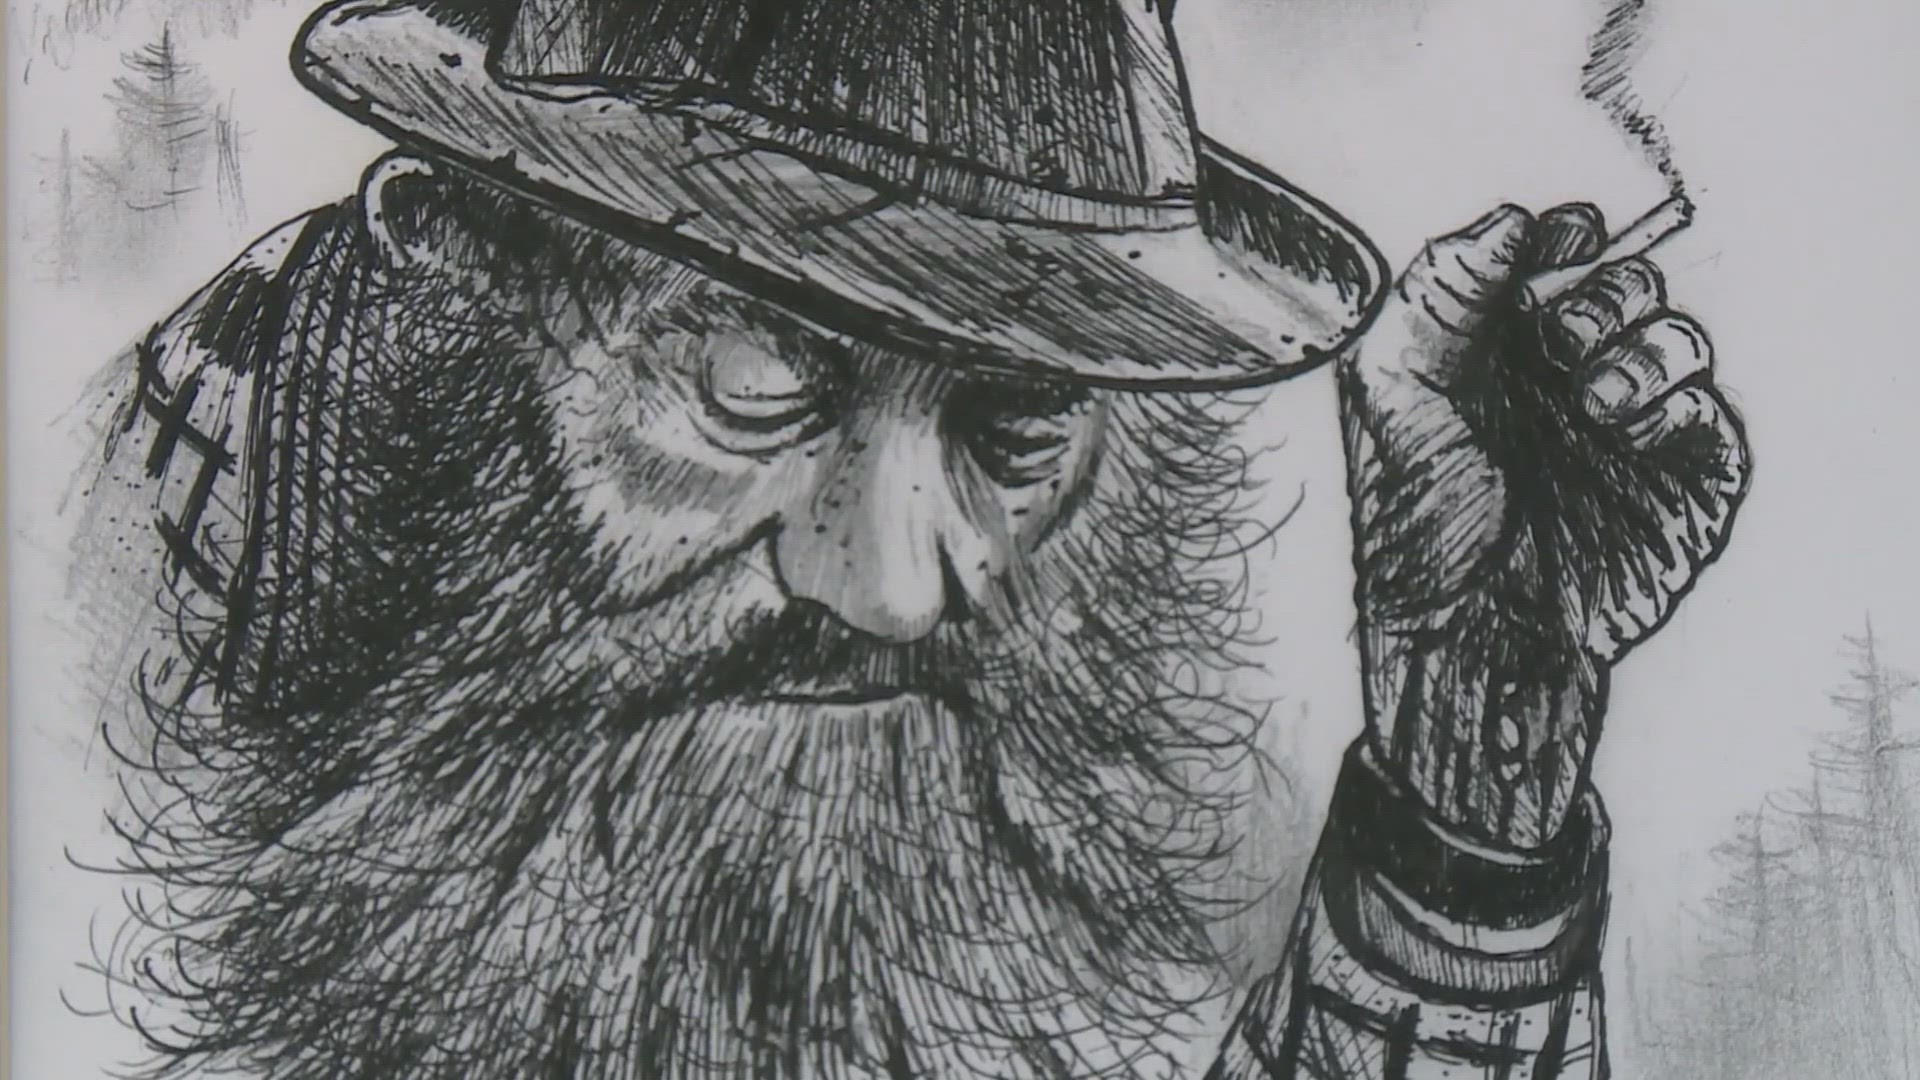 From the shadows to the spotlight, Popcorn Sutton brewed up quite the legacy of his moonshine.